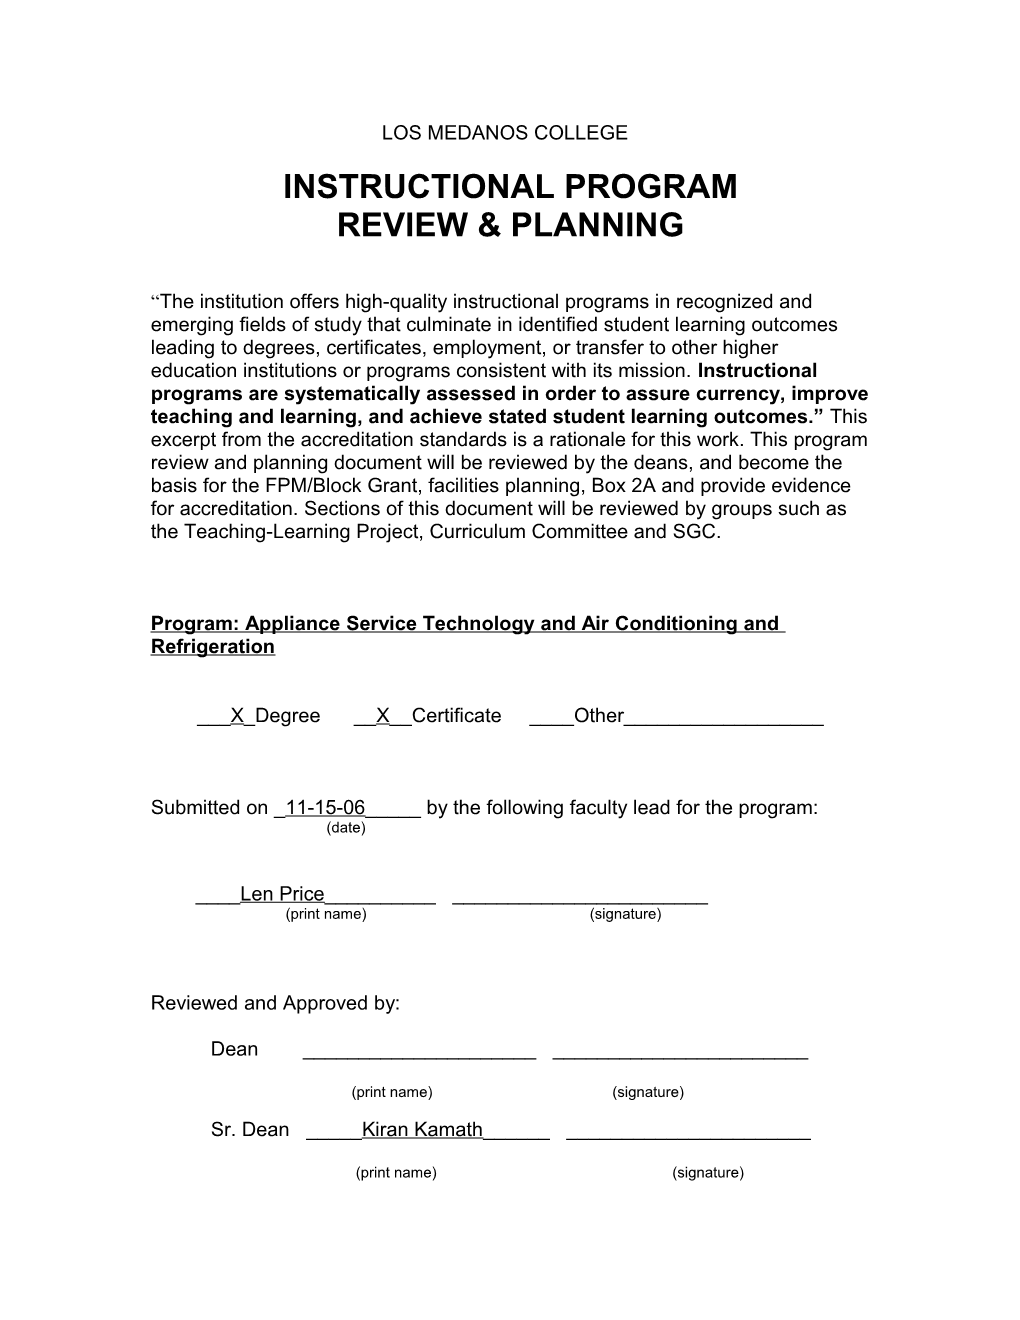 Instructional Program Review And Planning